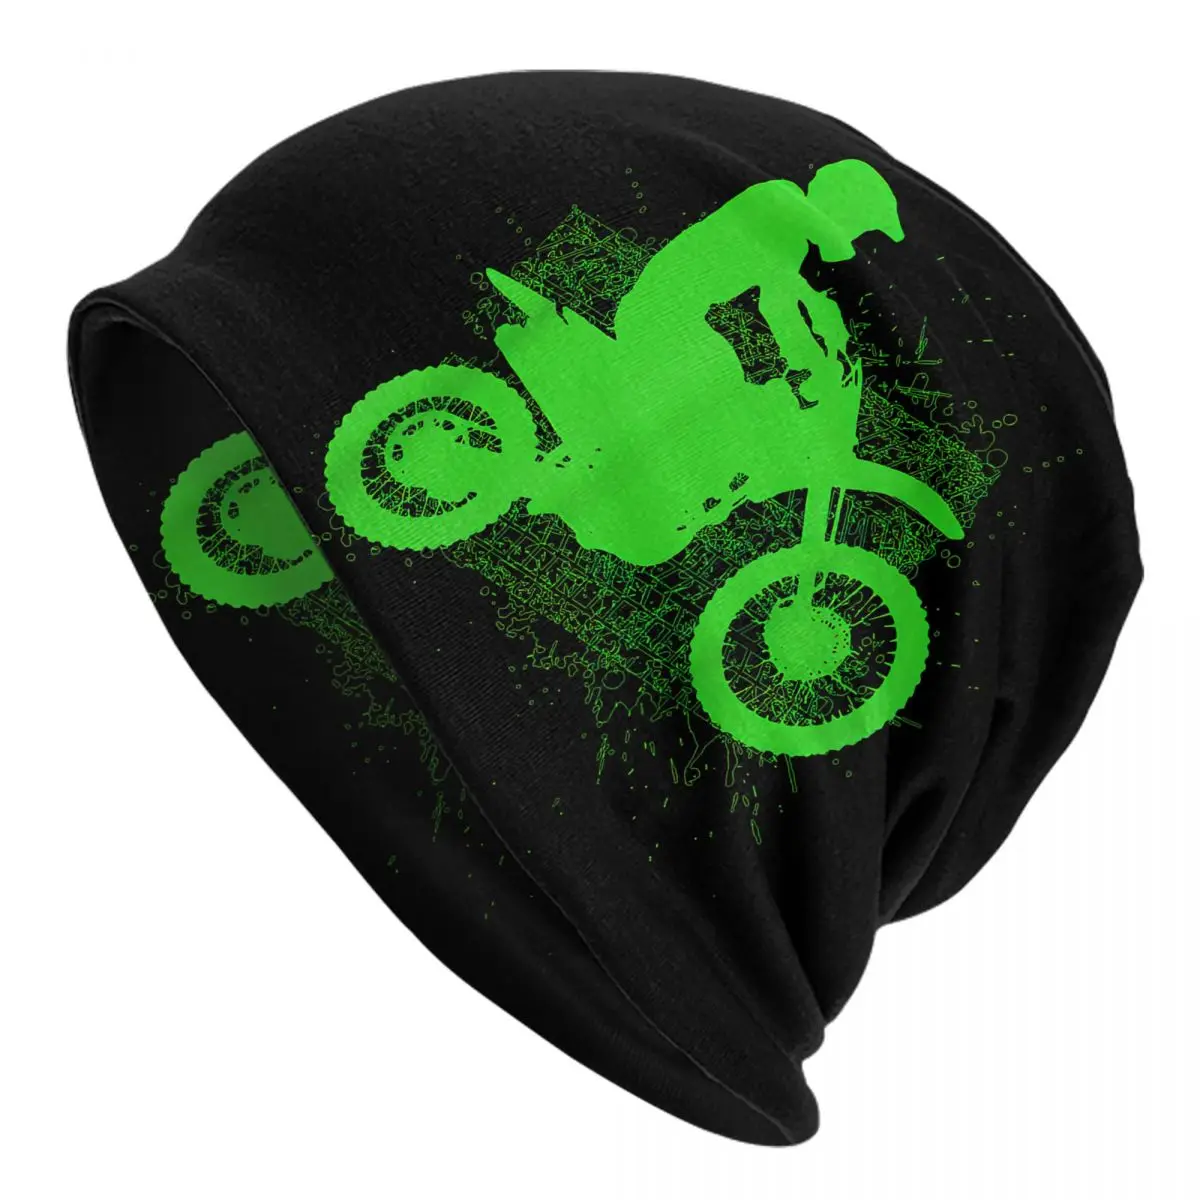 Dirt Bike Rider Tire Tracks Neon Green Youth Adult Men's Women's Knit Hat Keep warm winter knitted hat